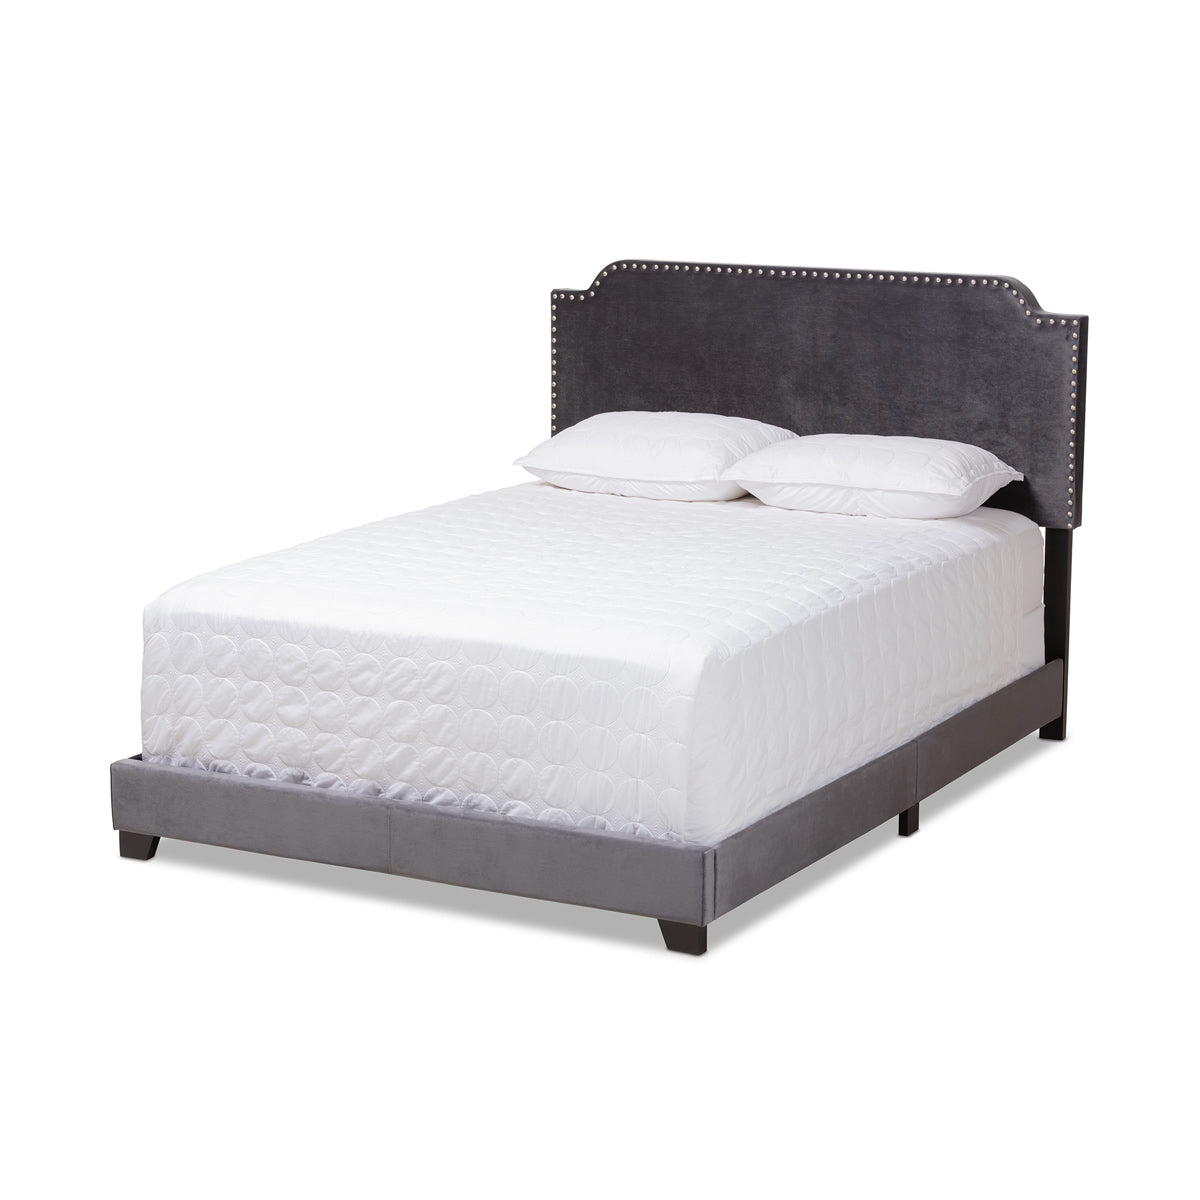 Baxton Studio Darcy Luxe and Glamour Dark Grey Velvet Upholstered Queen Size Bed Baxton Studio-0-Minimal And Modern - 1